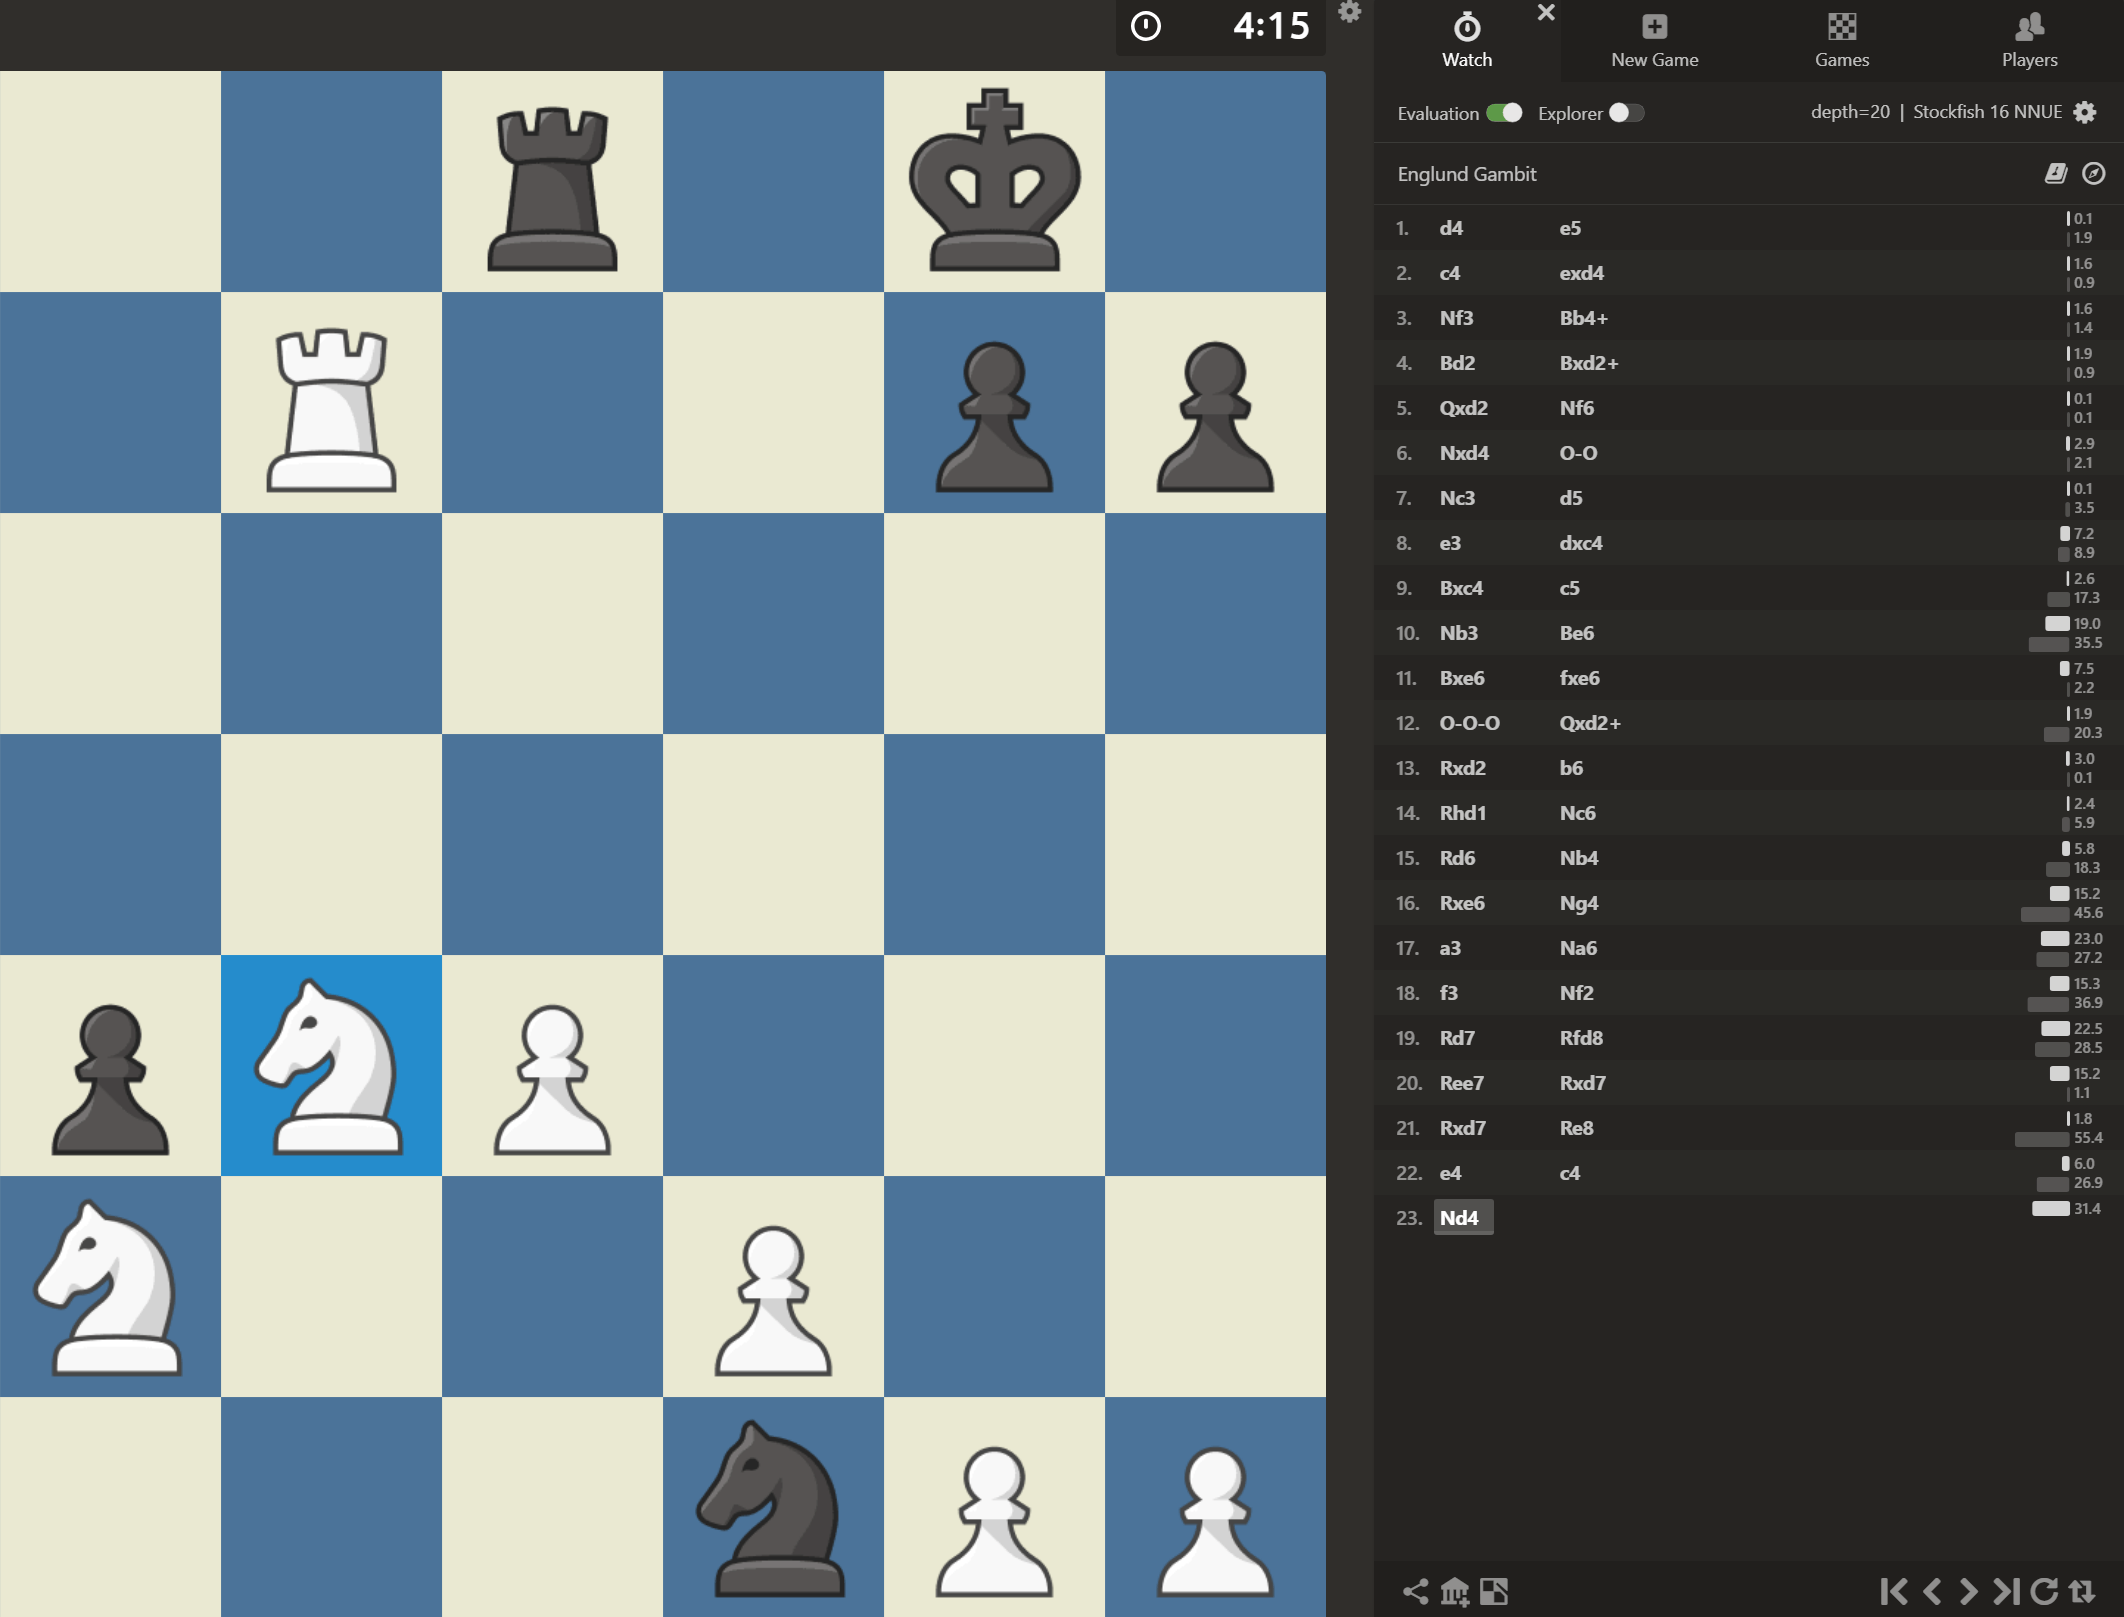 is chess24 part of chess.com now?? : r/chess